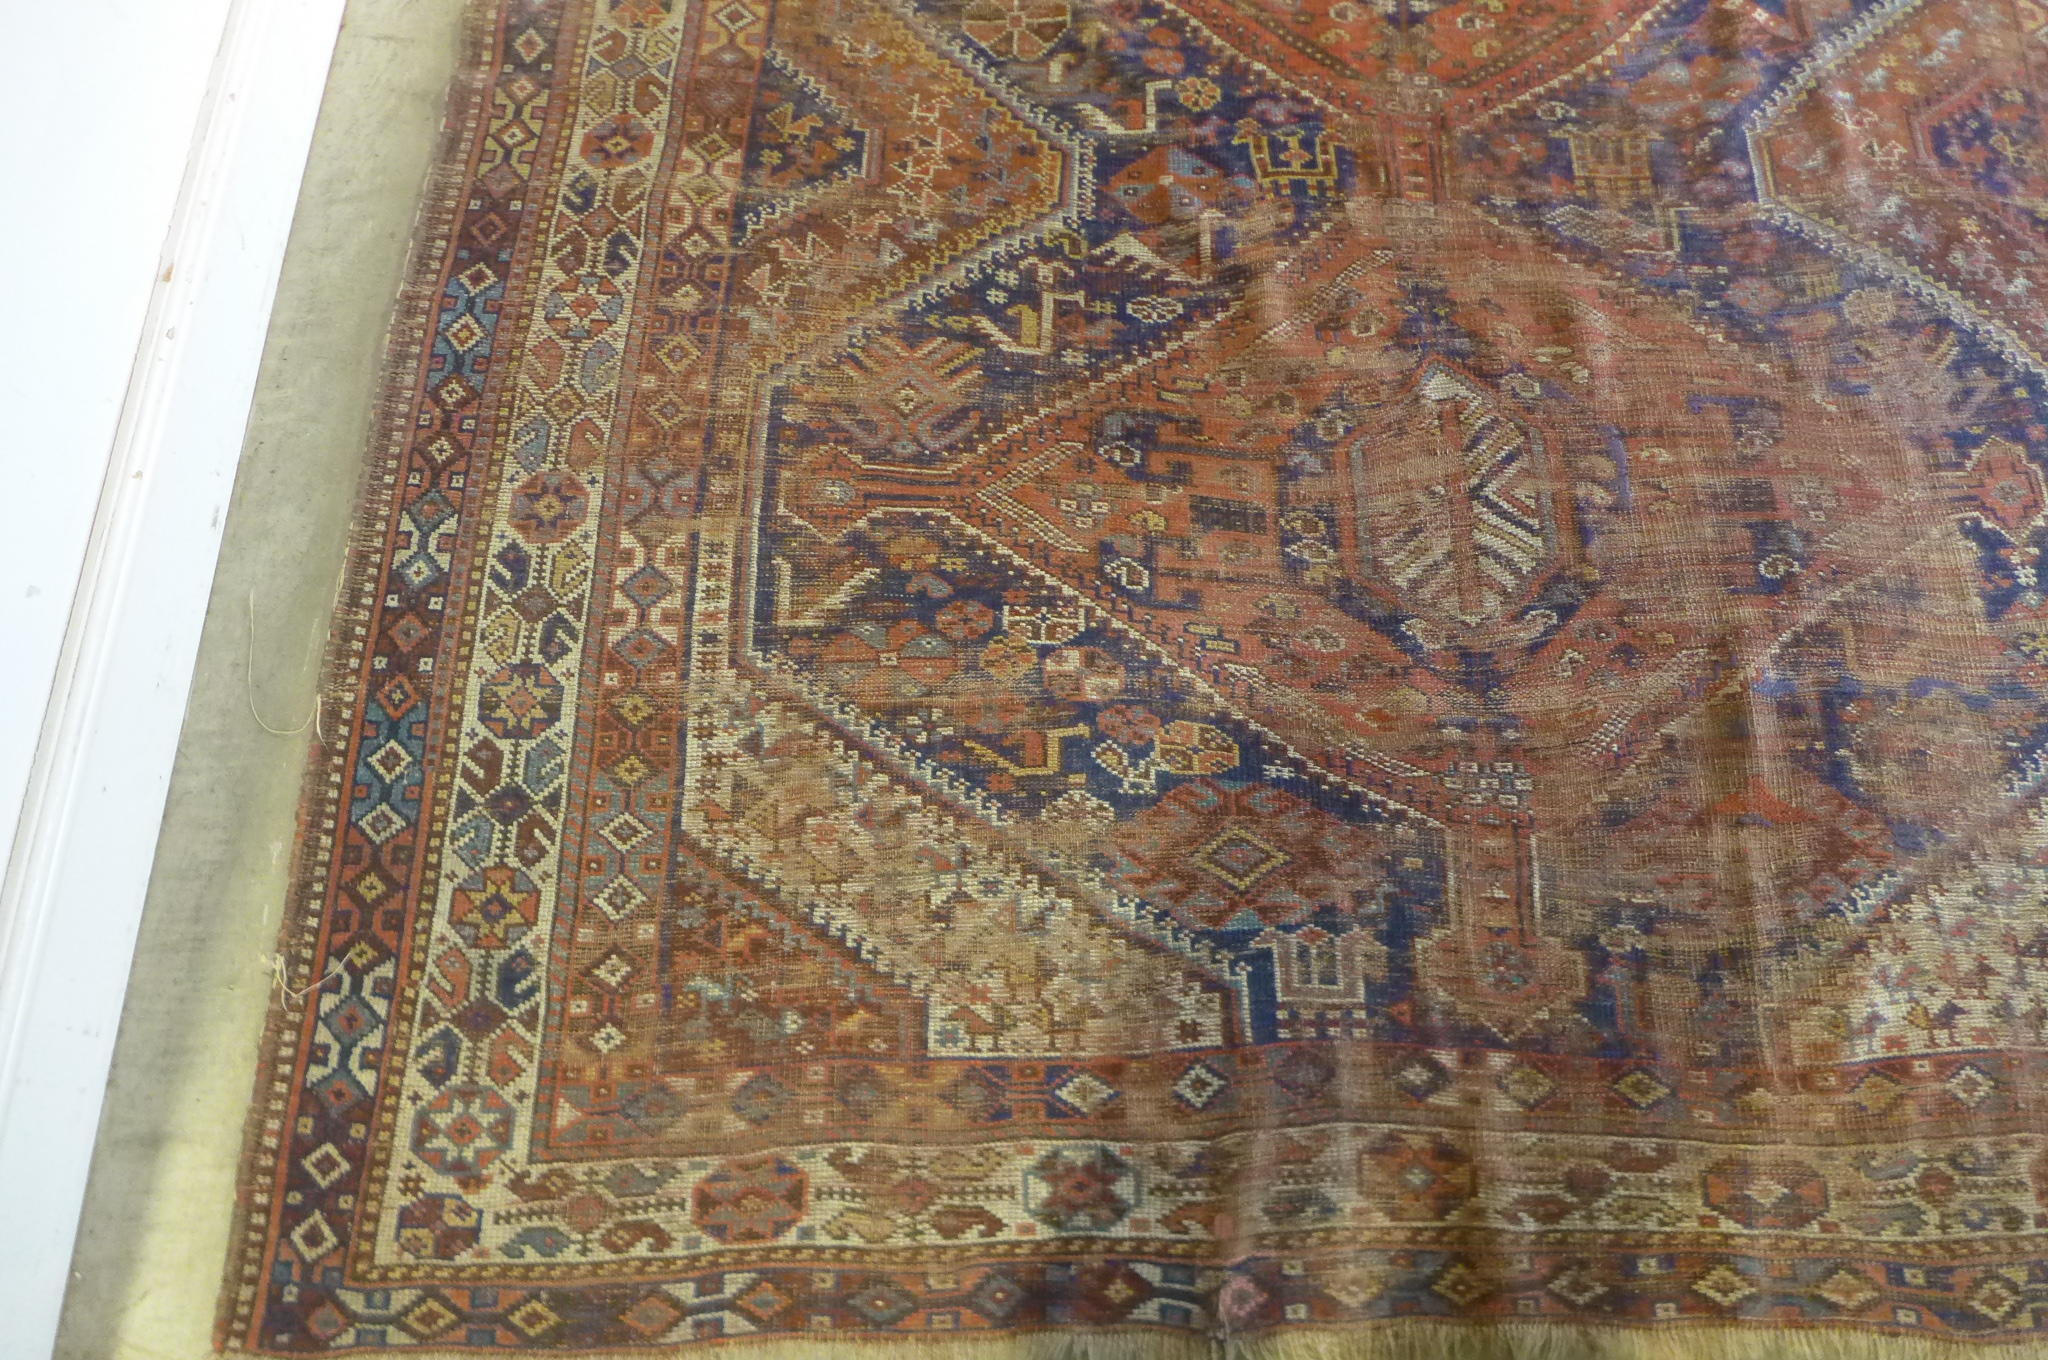 A vintage hand knotted Eastern woollen rug, 302cm x 206cm, in worn condition and some fading - Image 3 of 8